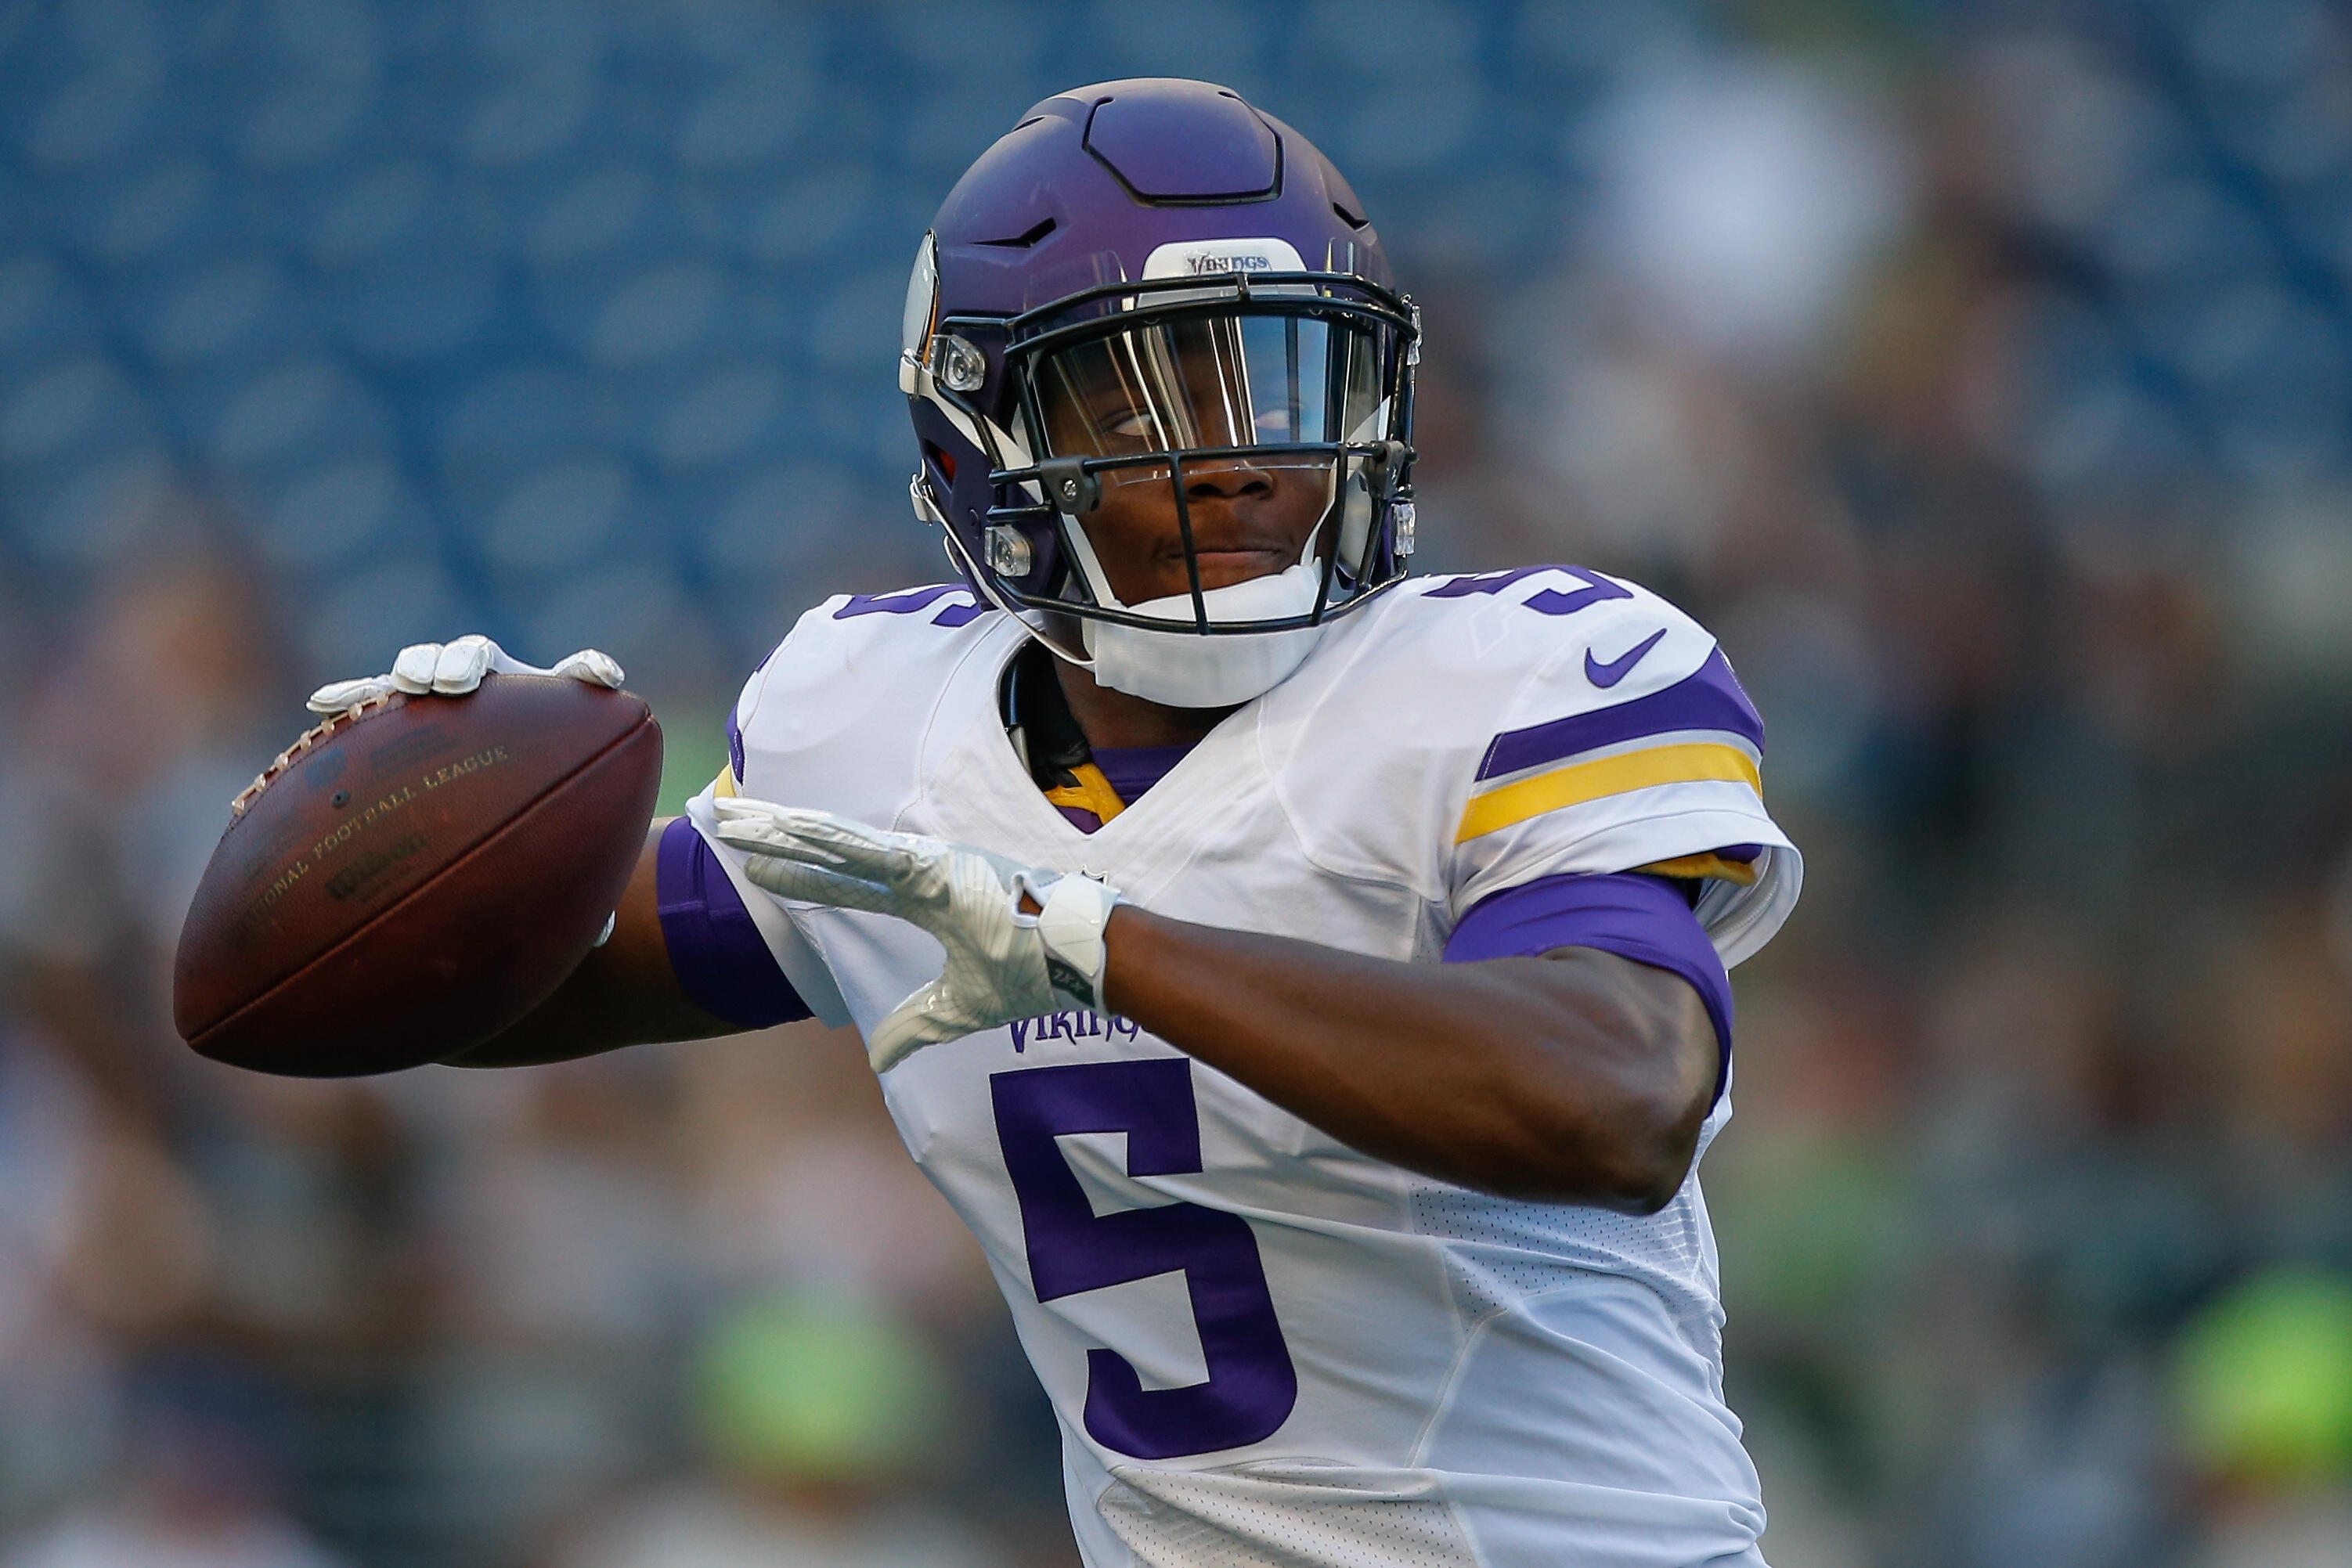 SEATTLE, WA - AUGUST 18:  Quarterback Teddy Bridgewater #5 of the Minnesota Vikings warms up prior to the preseason game against the Seattle Seahawks at CenturyLink Field on August 18, 2016 in Seattle, Washington.  (Photo by Otto Greule Jr/Getty Images)